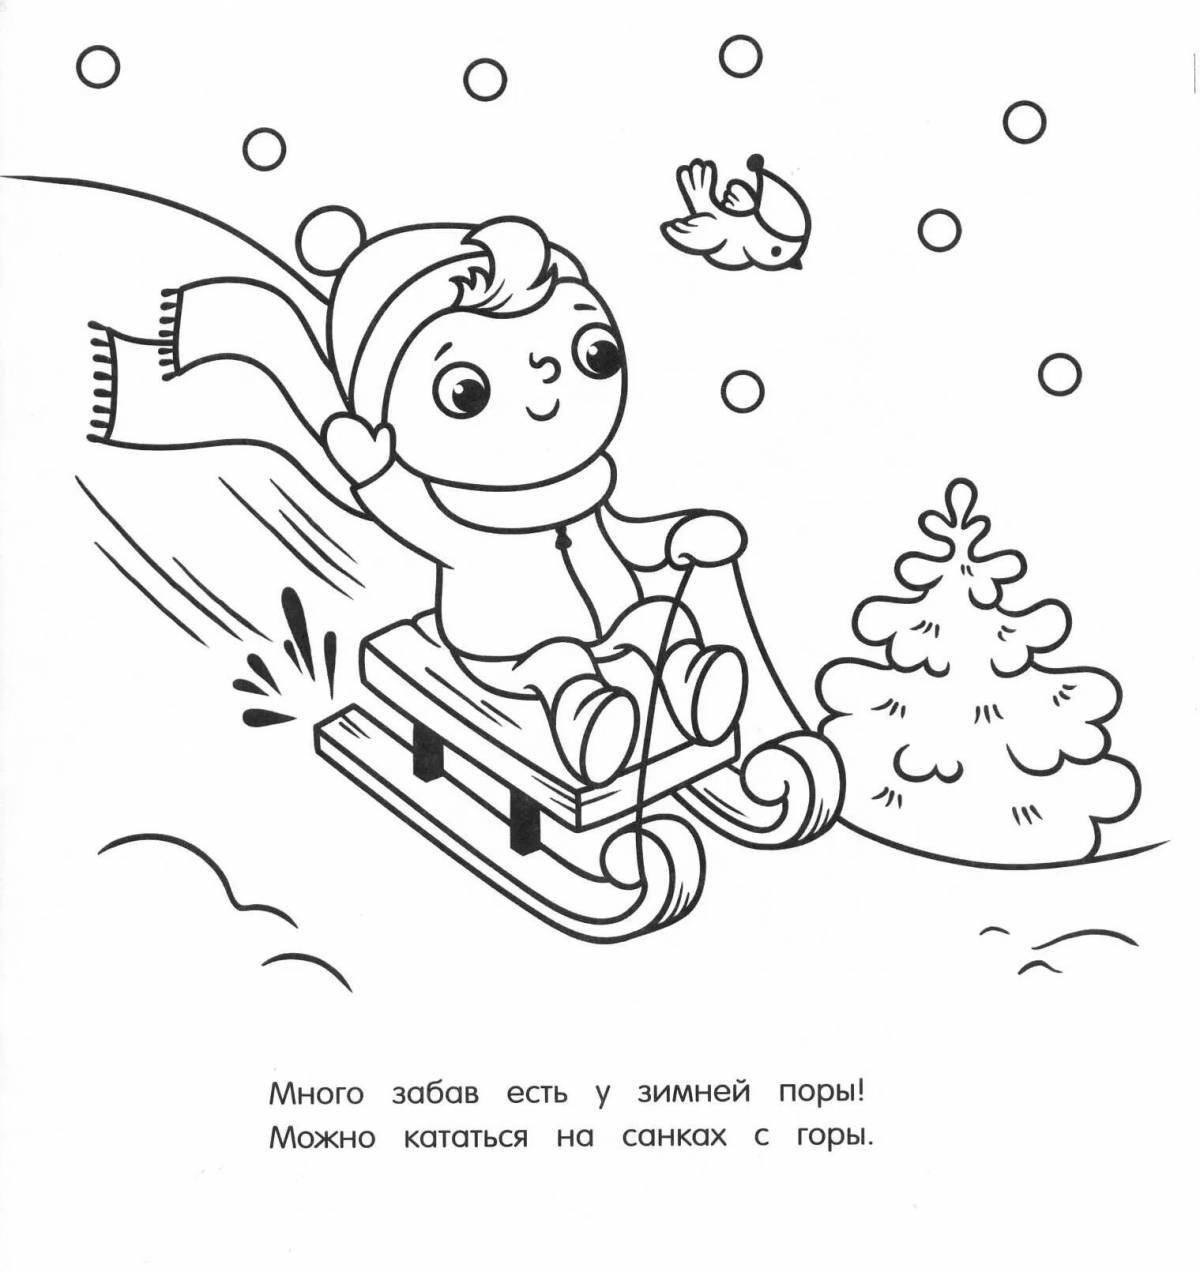 Shiny snow slide coloring book